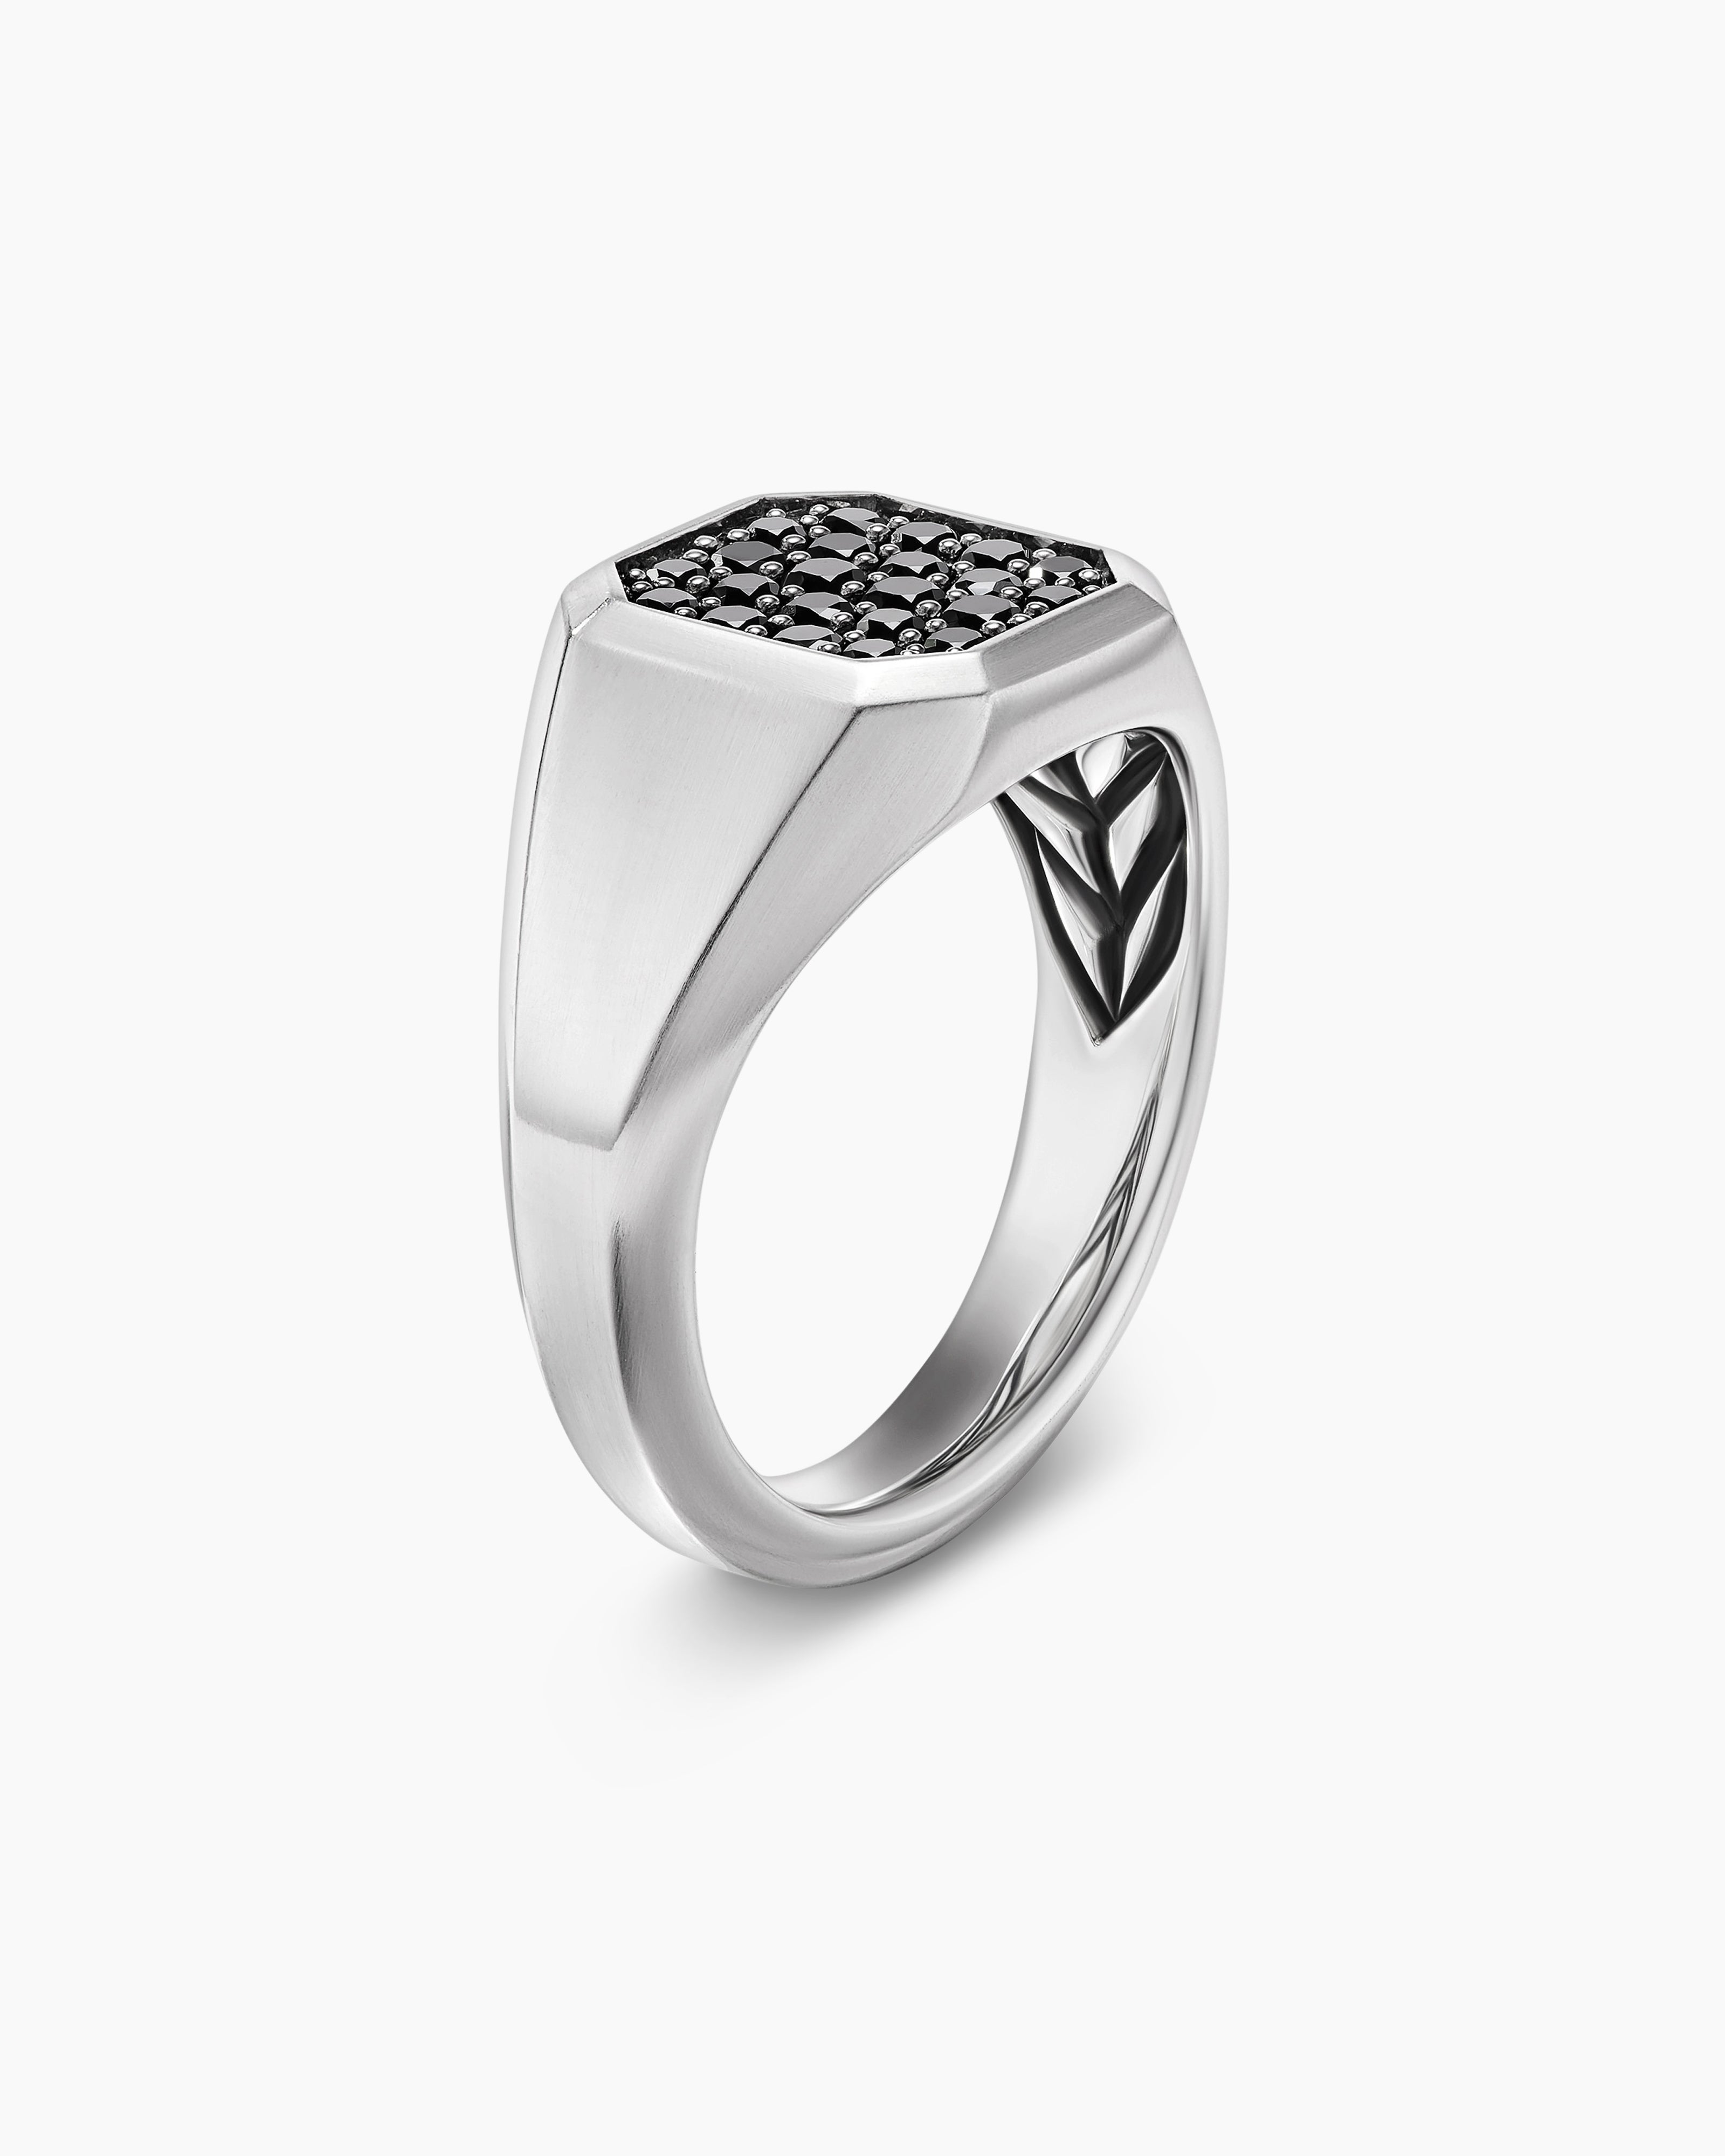 Streamline® Signet Ring in Sterling Silver with Black Diamonds, 14mm